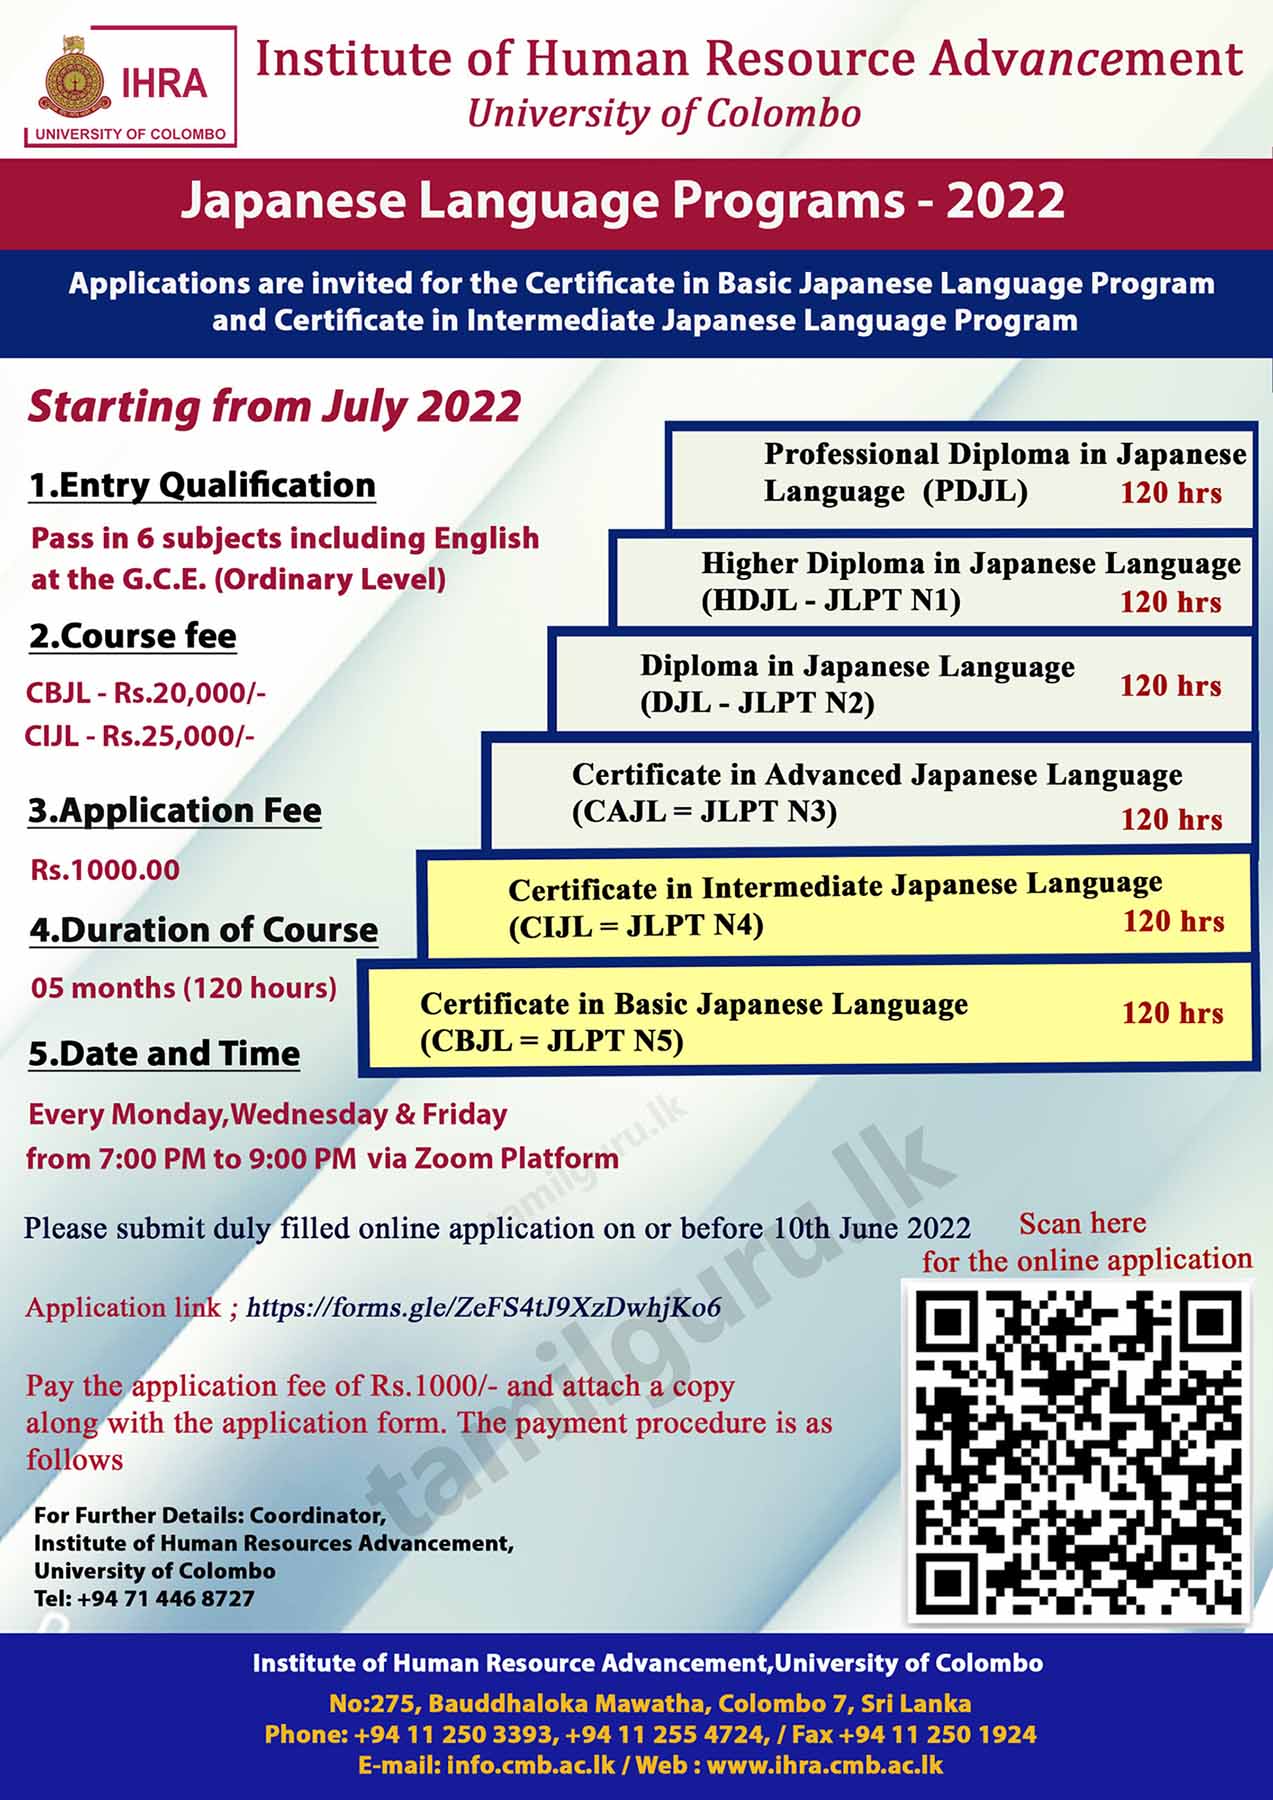 Calling Applications for Japanese Language Programs (Courses) 2022 Conducted by University of Colombo